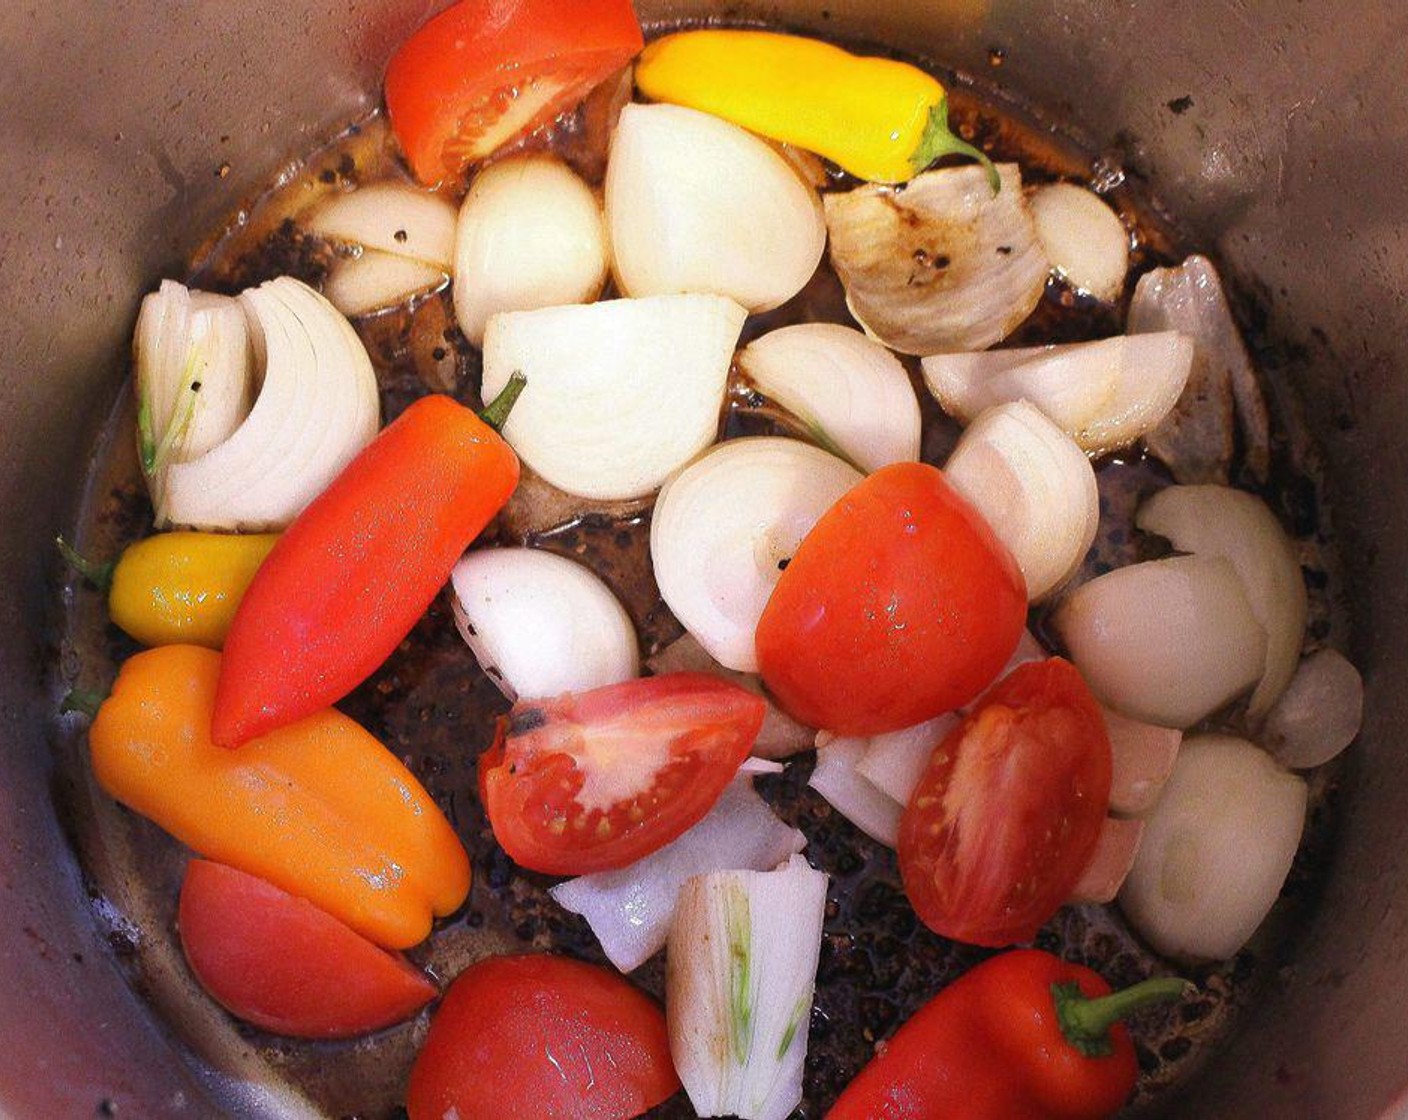 step 3 In the remaining fat, sauté Onions (2), Tomatoes (2), Chili Peppers (5), and Garlic (5 cloves) until the onions are caramelized.